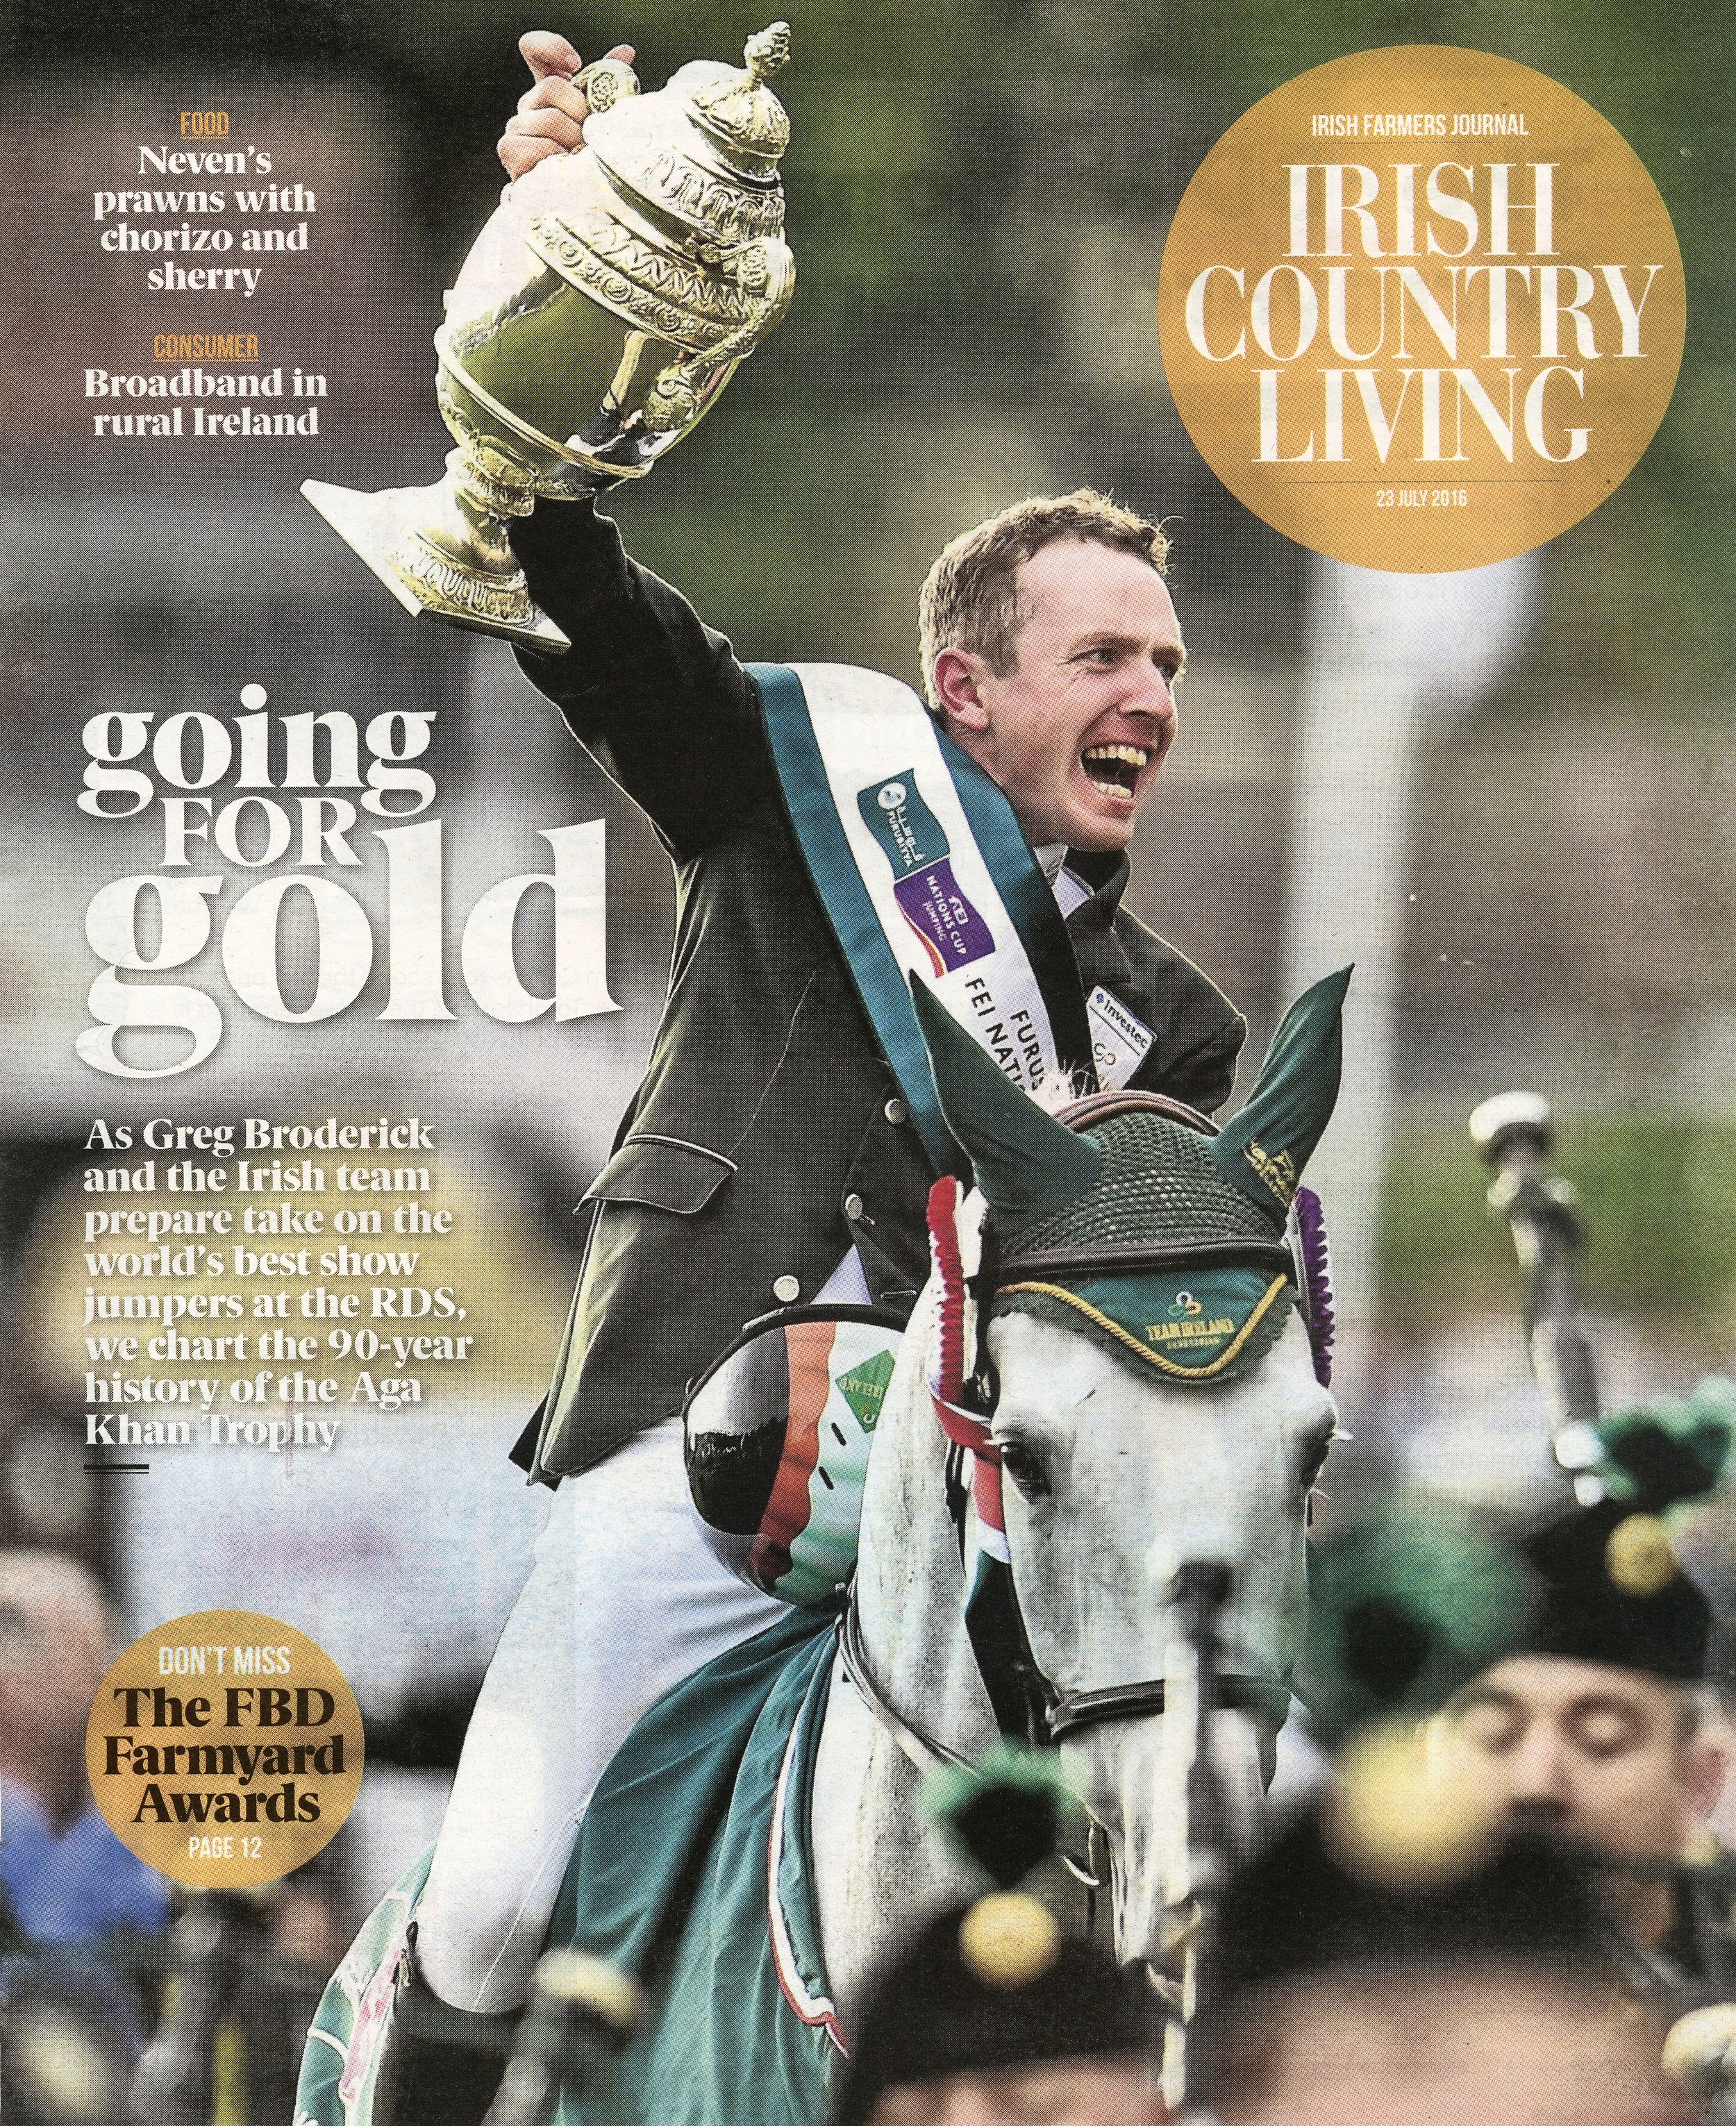  Greg Broderick of Ireland raises the Aga Khan Cup at the RDS August 7 2015  Irish Country Living  